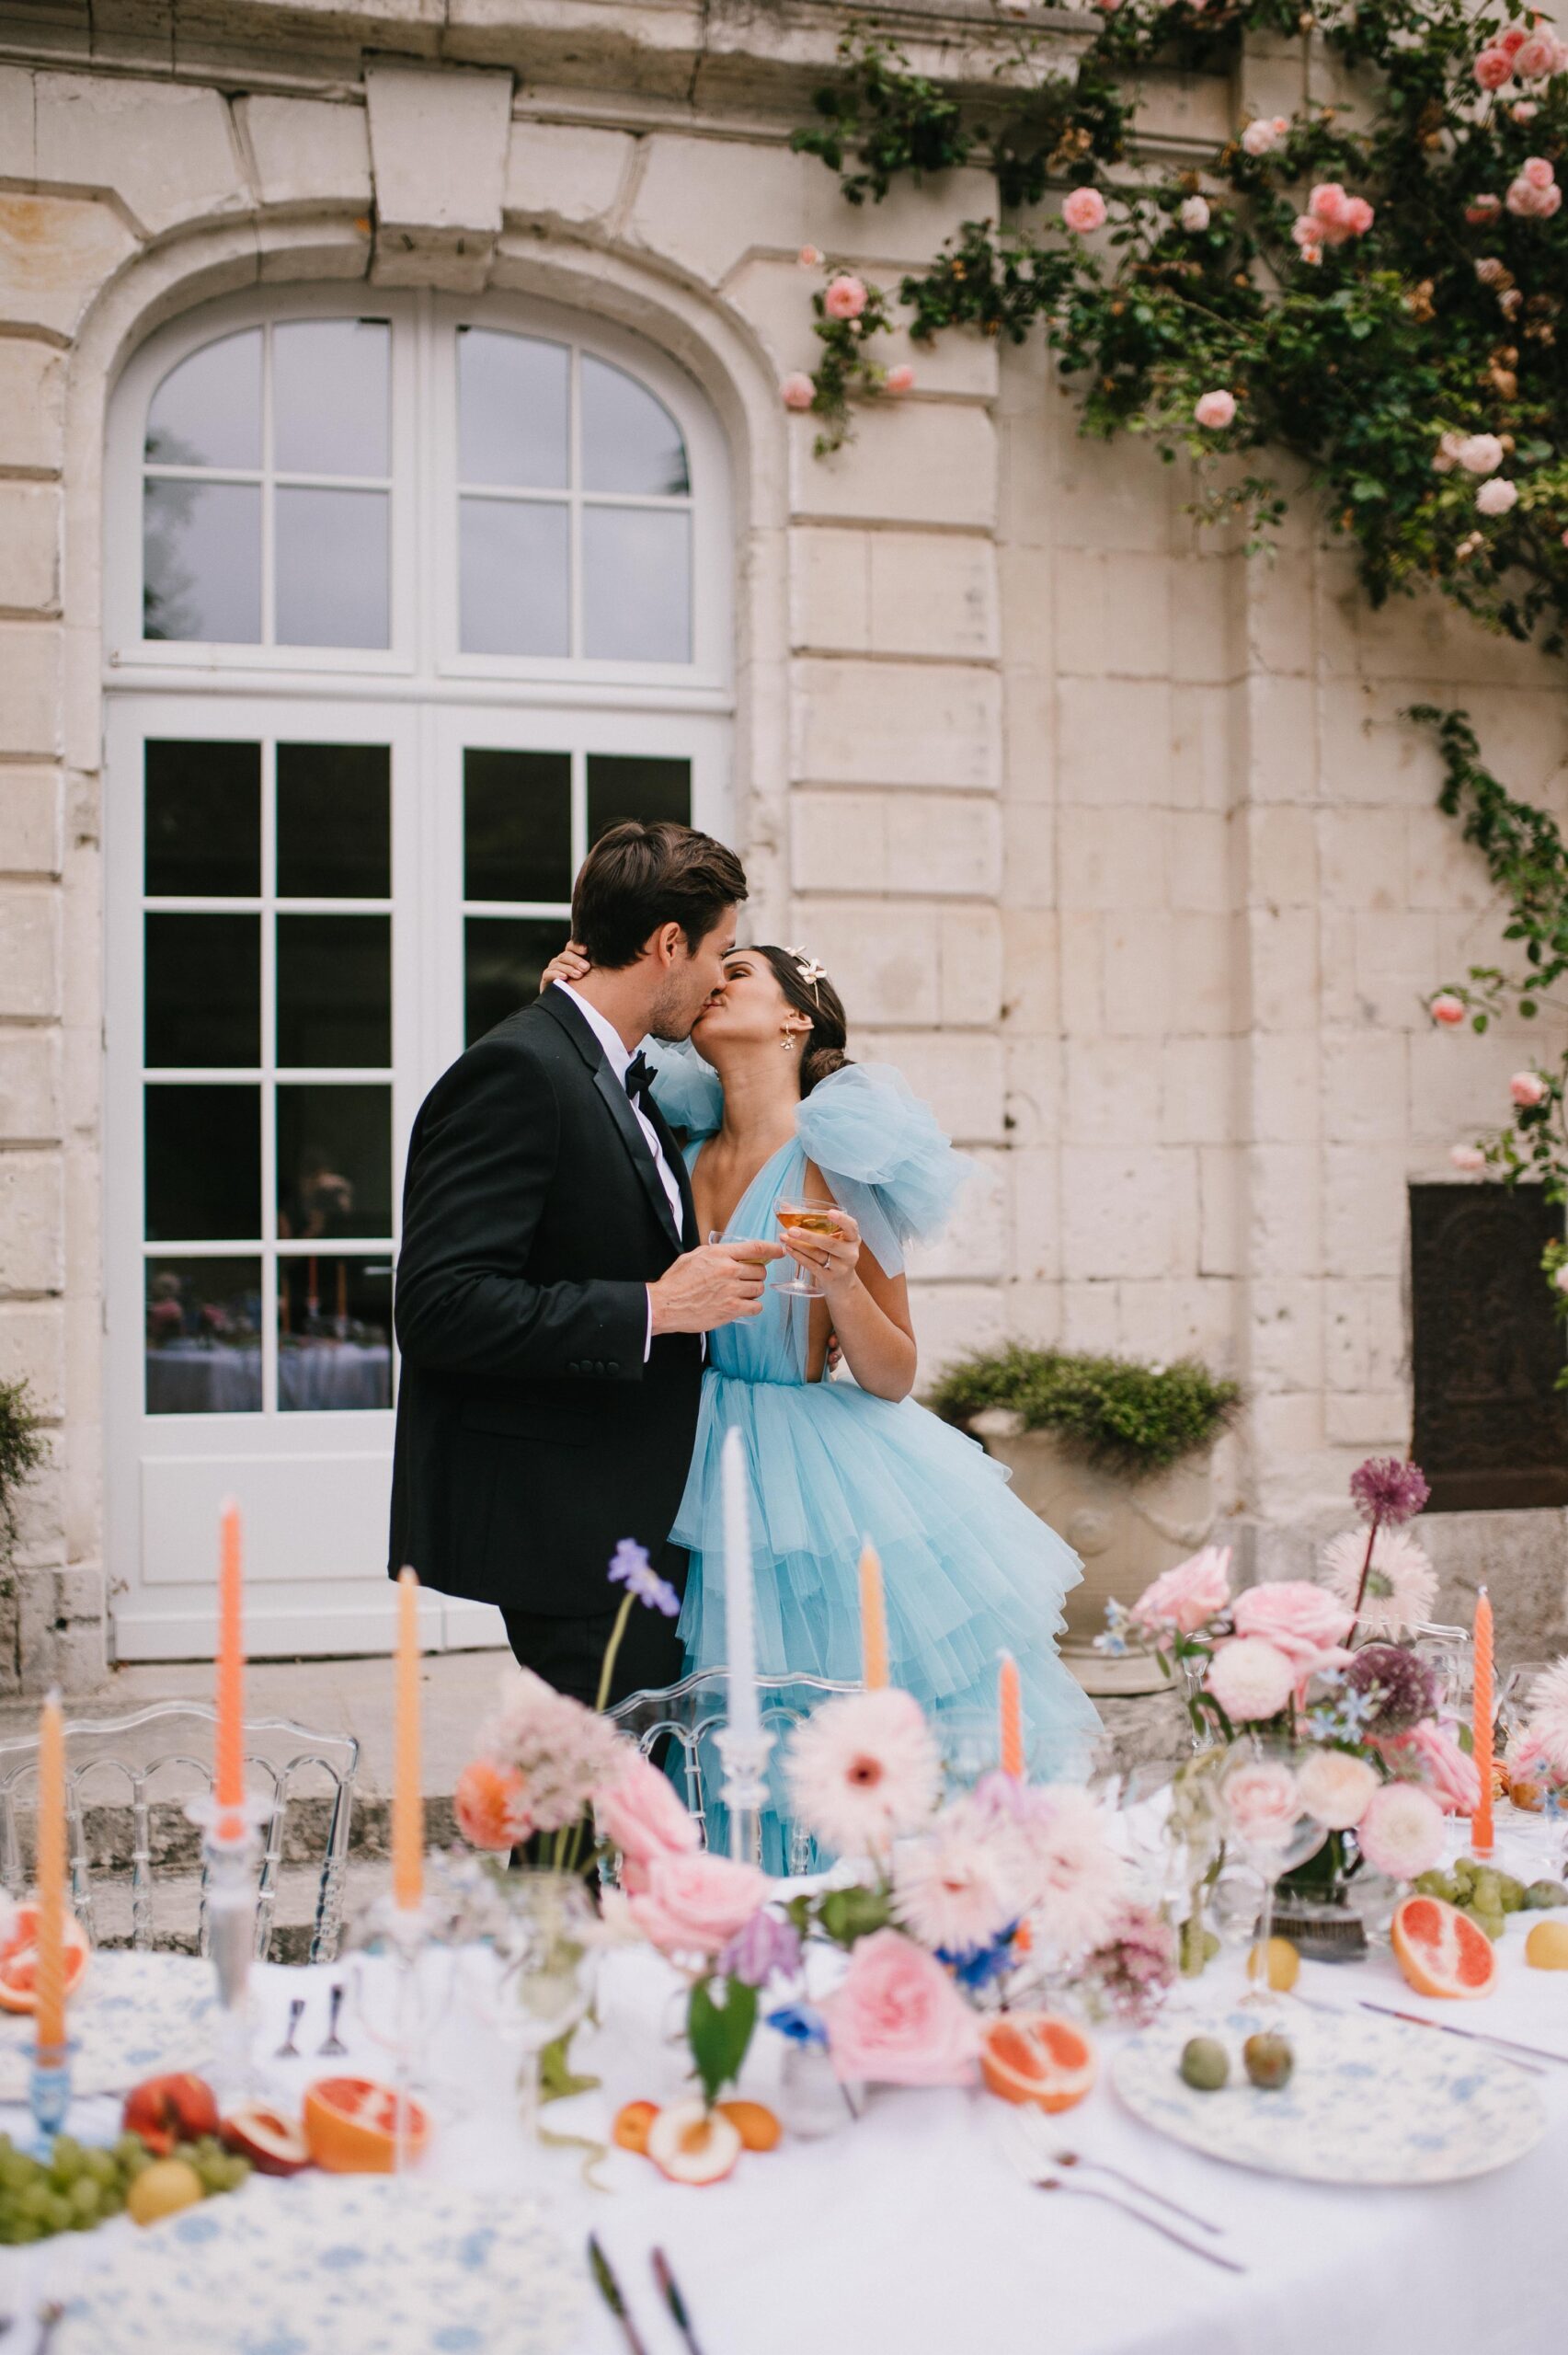 French Chateau Wedding with Sarah Hurja Photography's latest blog. Let me inspire your Dream Destination Wedding in France!